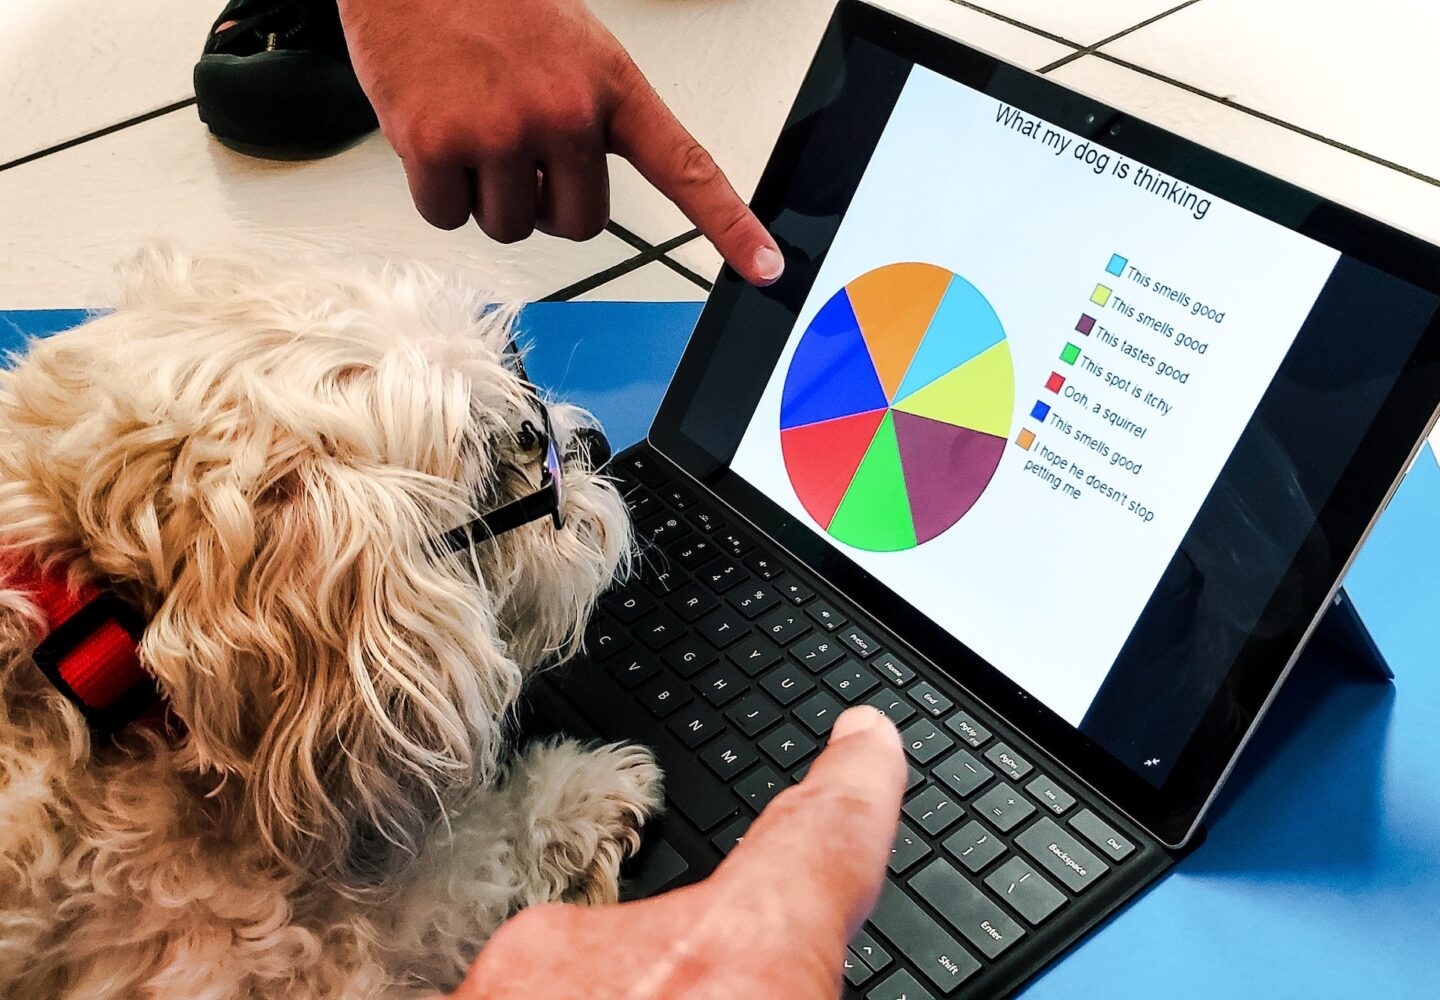 Cute pets wearing glasses in funniest photos using laptop with data chart of her activities.